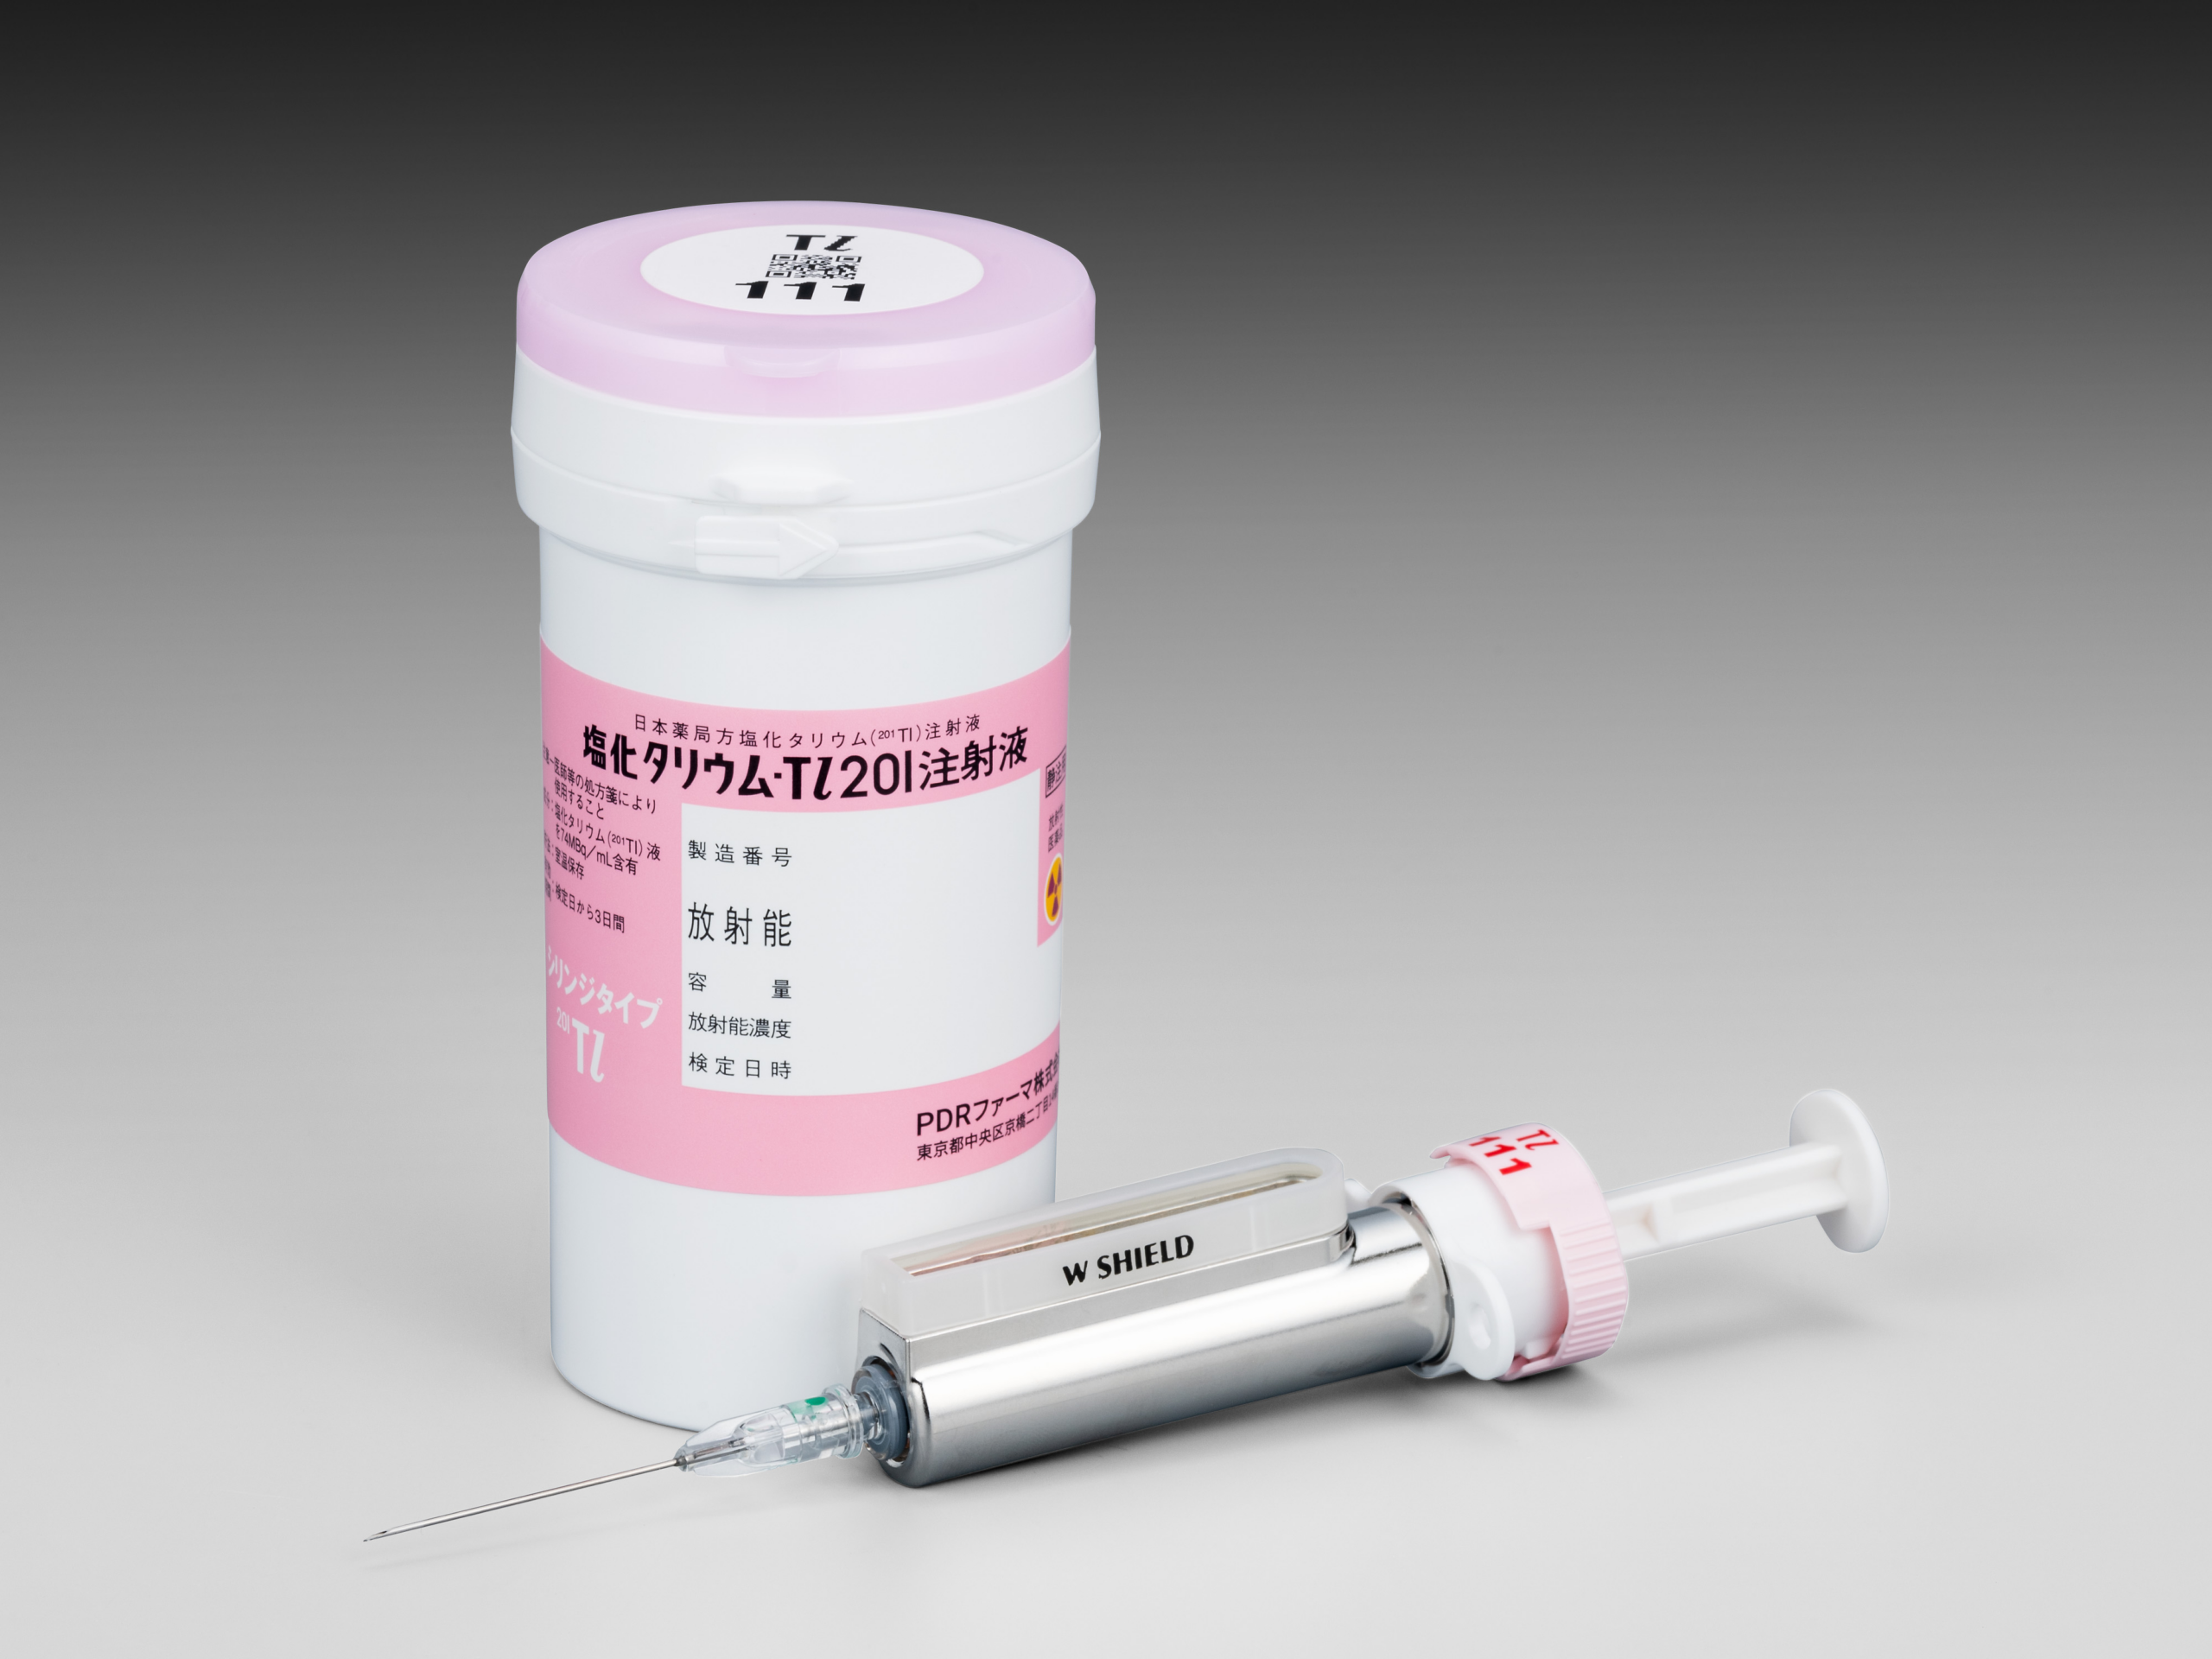 Thallium Chloride-Tl201 Injection <br>(Pre-filled syringe type)